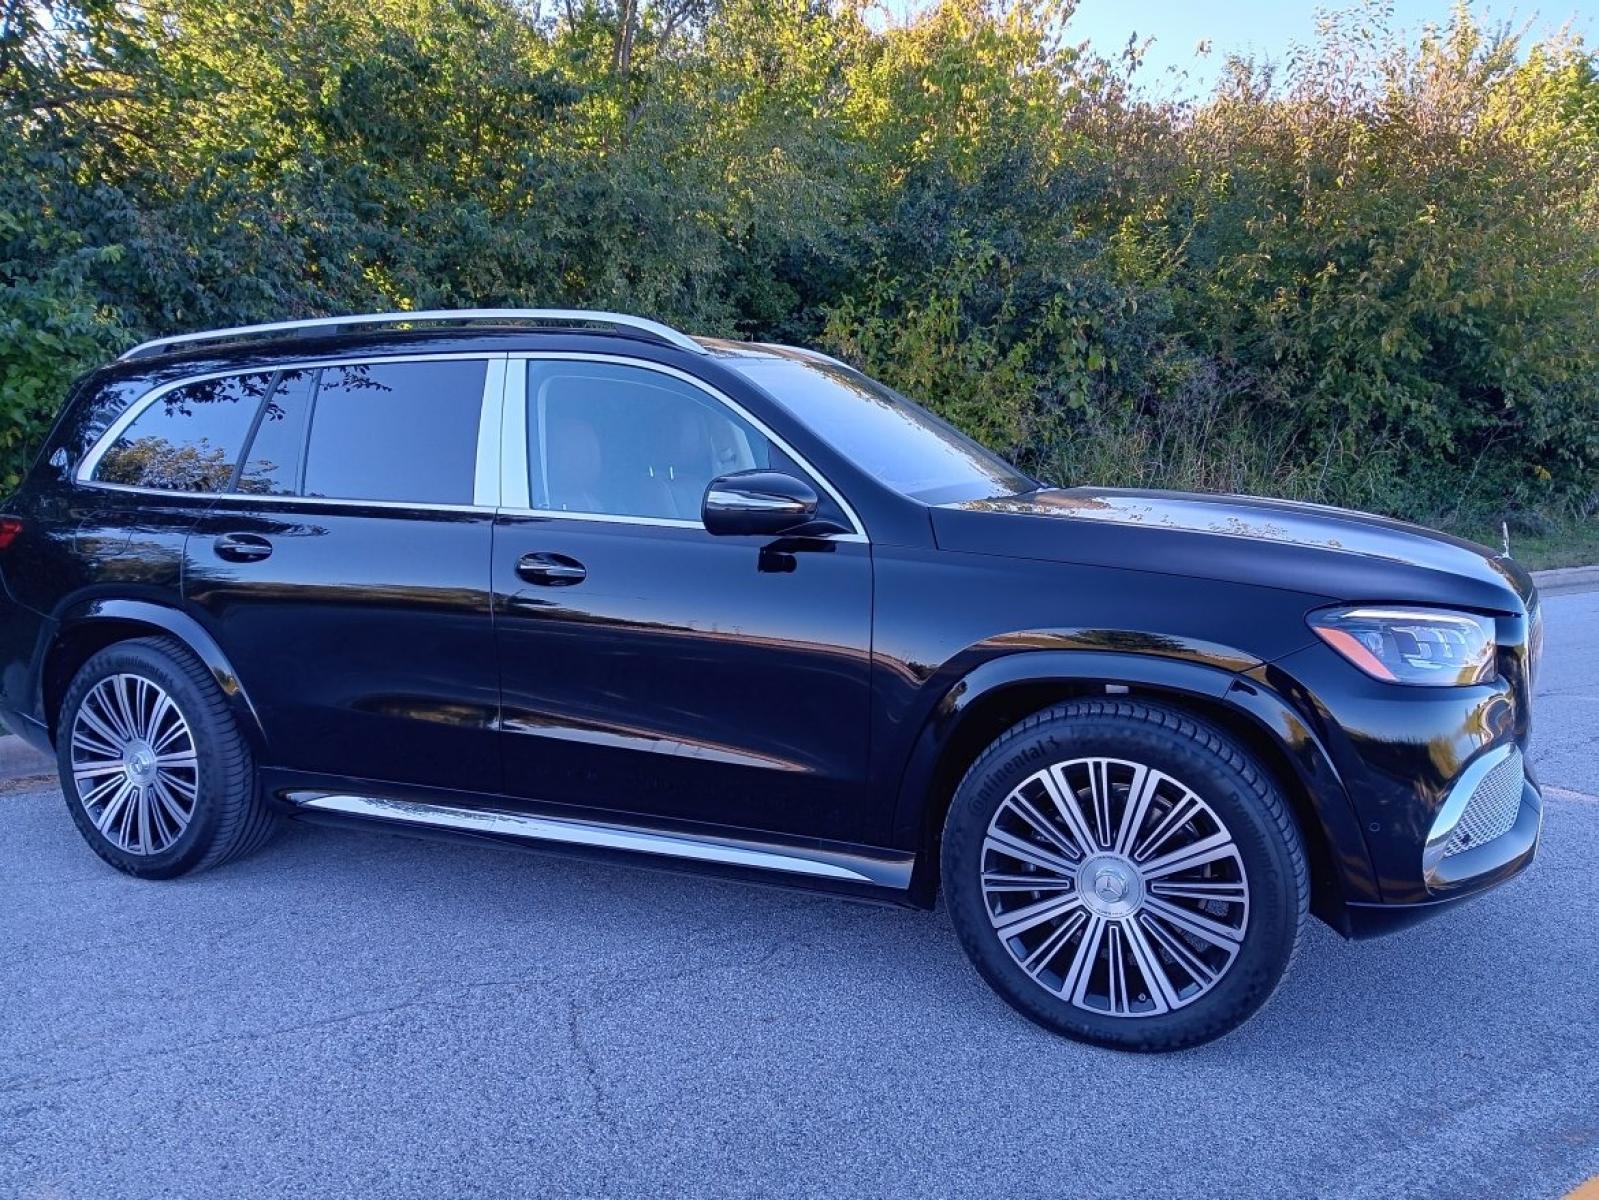 2023 Black Maybach GLS600Z1 , 0.000000, 0.000000 - 2023 Maybach GLS600Z1 Obsidian Black Metallic, Mahagony/Macchiato Beige Exclusive Nappa Leather, Modification year 22/2, 4-seat configuration, Active Distance Assist DISTRONIC with Active Steering Assist, Refrigerator Rear Center Console, Folding Rear Tables. Trail Hitch w/increased towing capacity, - Photo #1